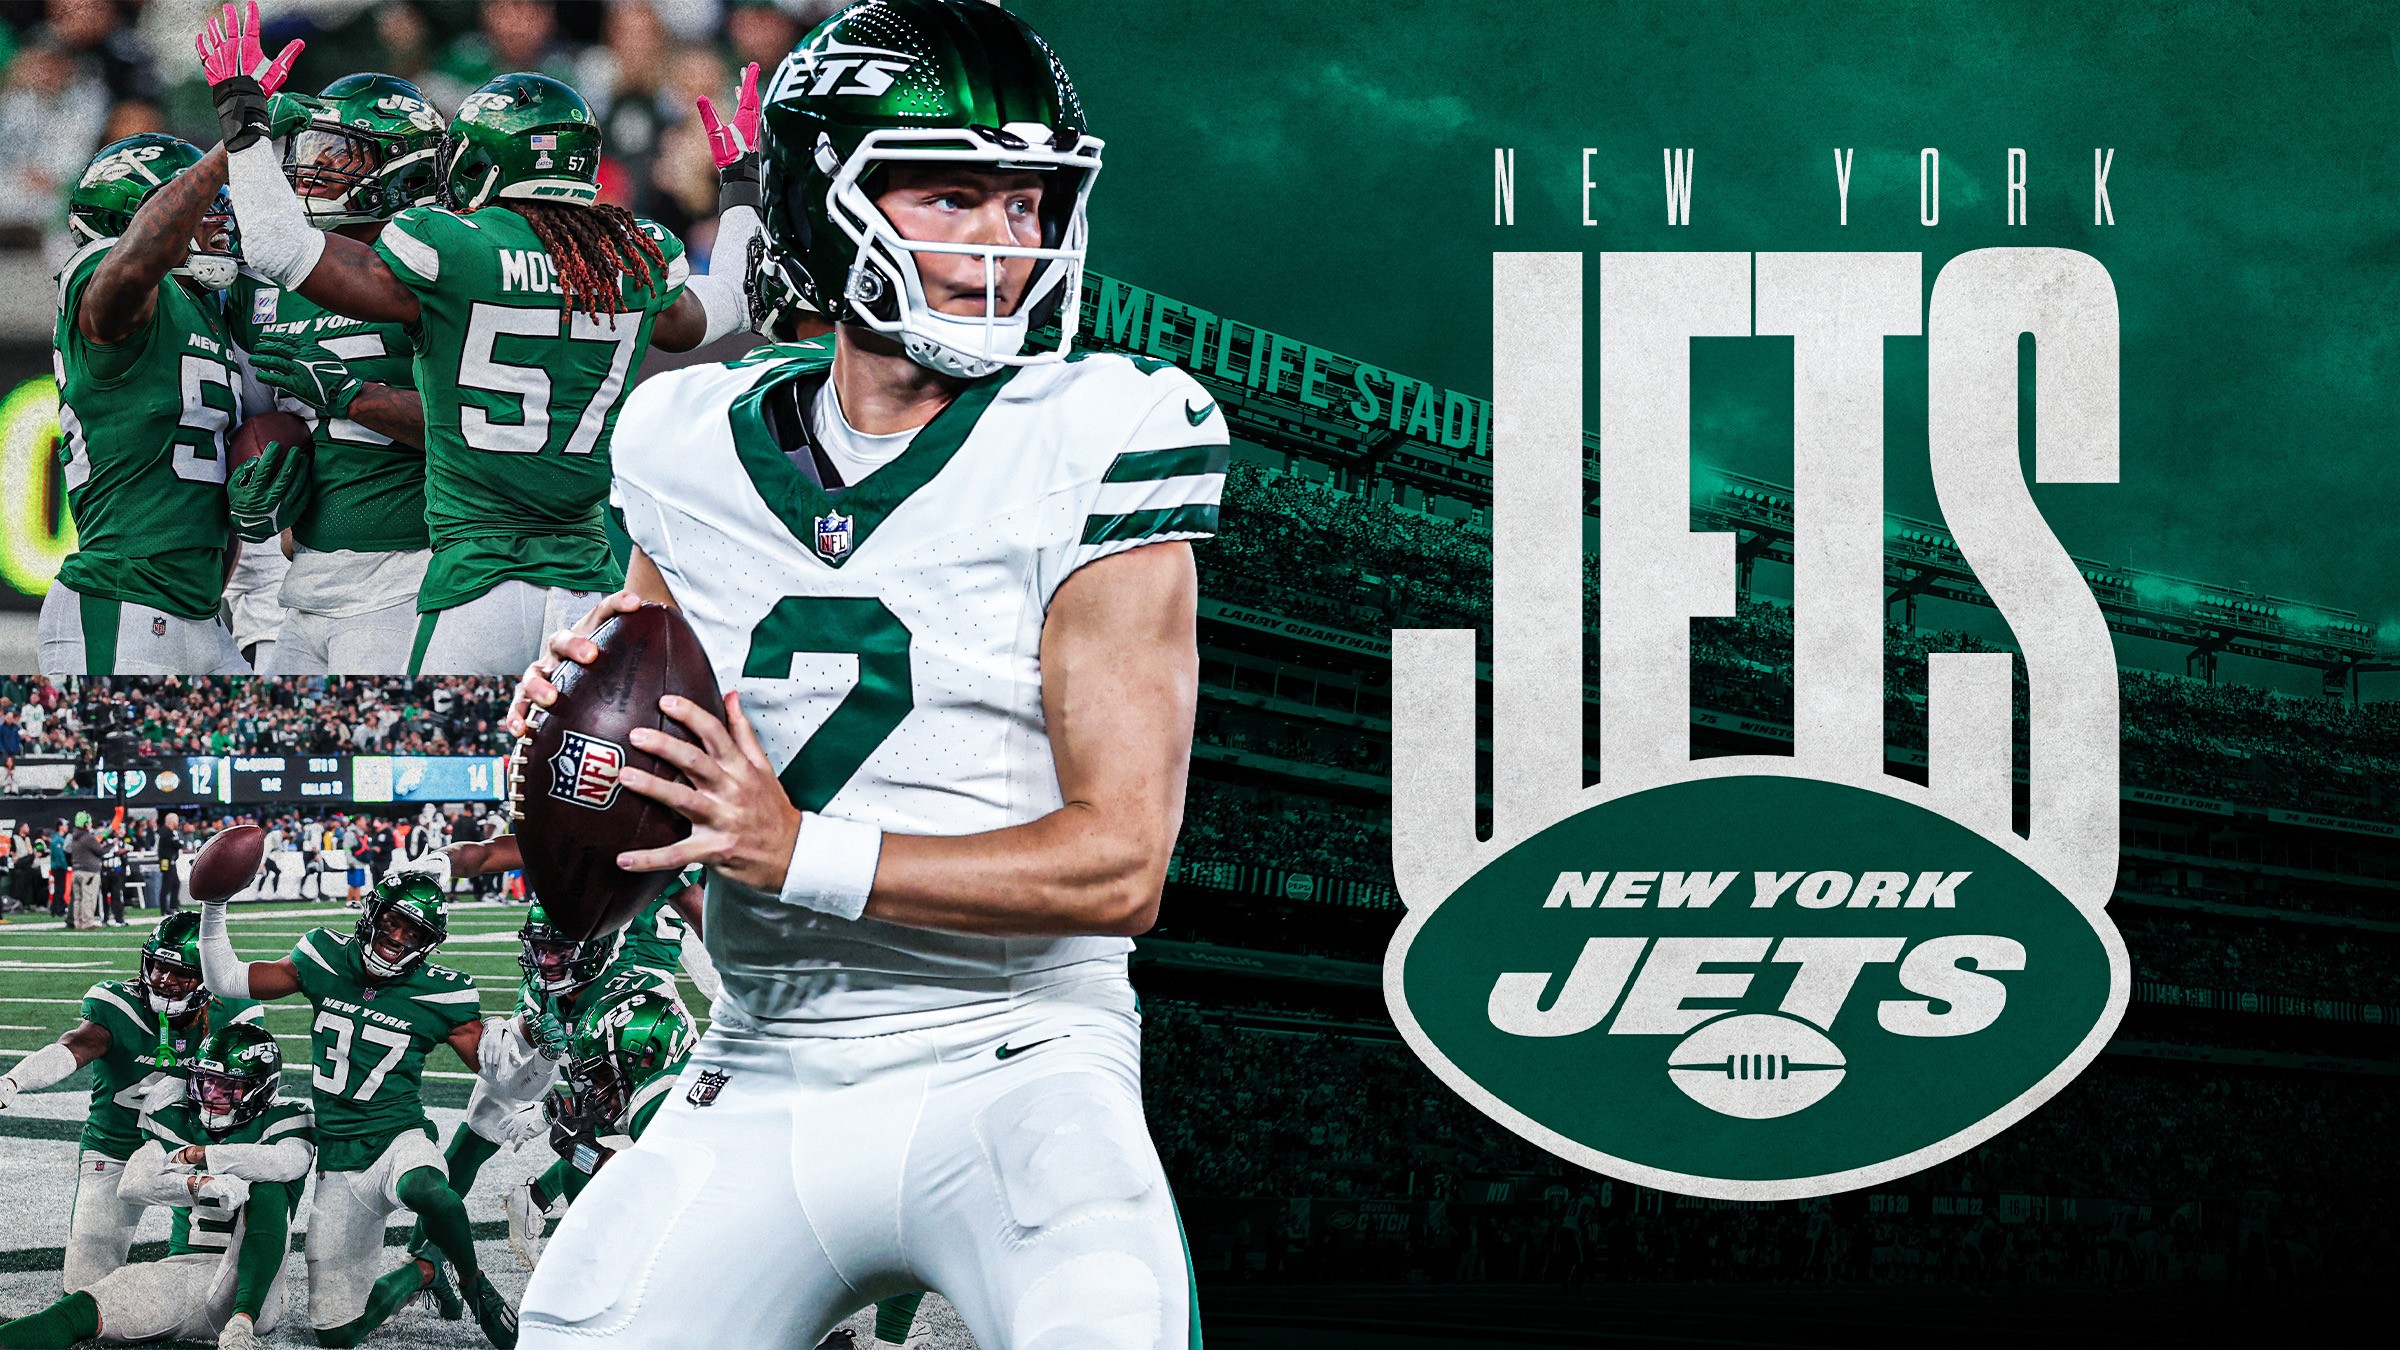 THE NEW YORK JETS: